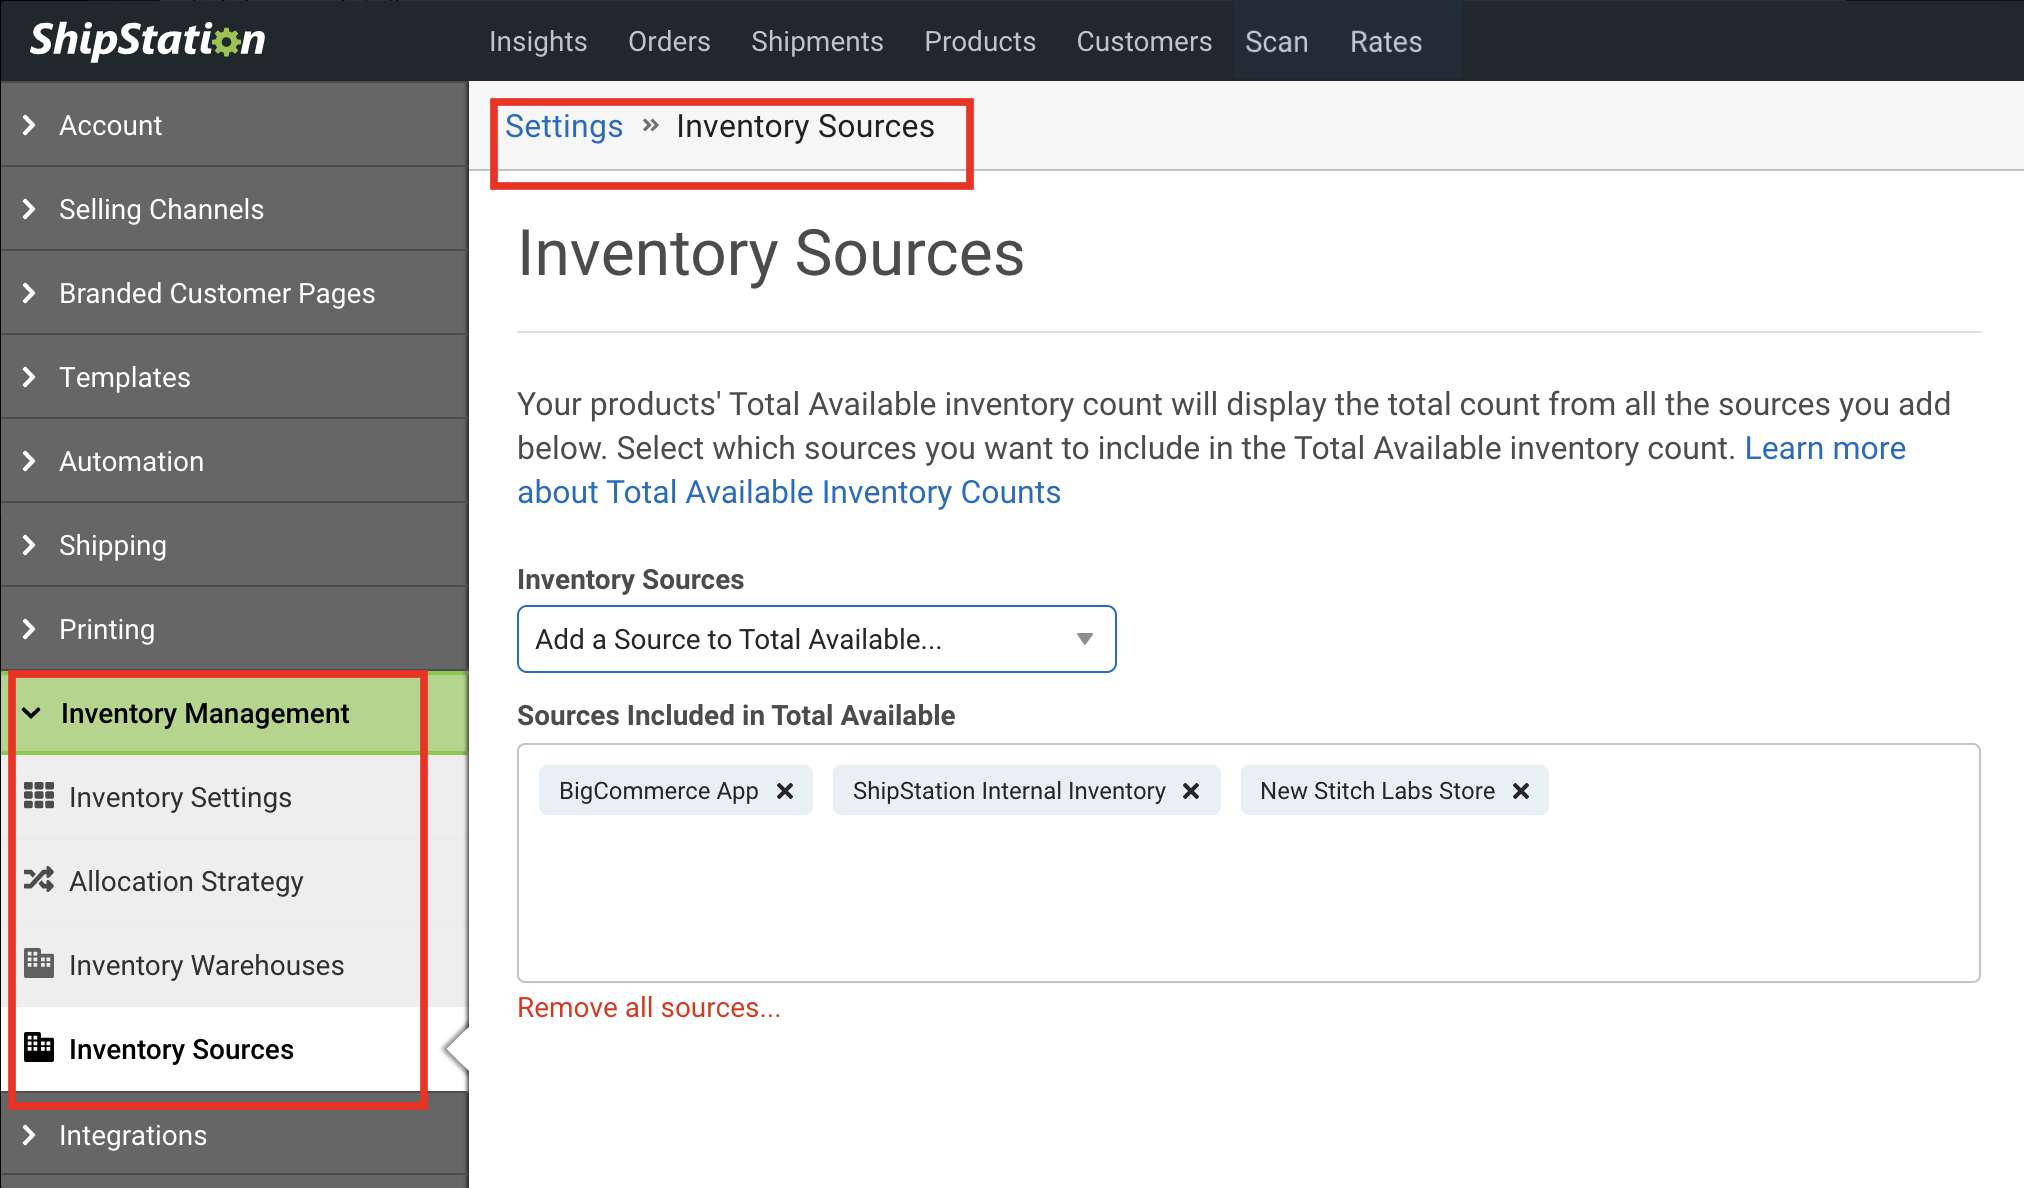 Inventory Sources settings page with multiple inventory sources added